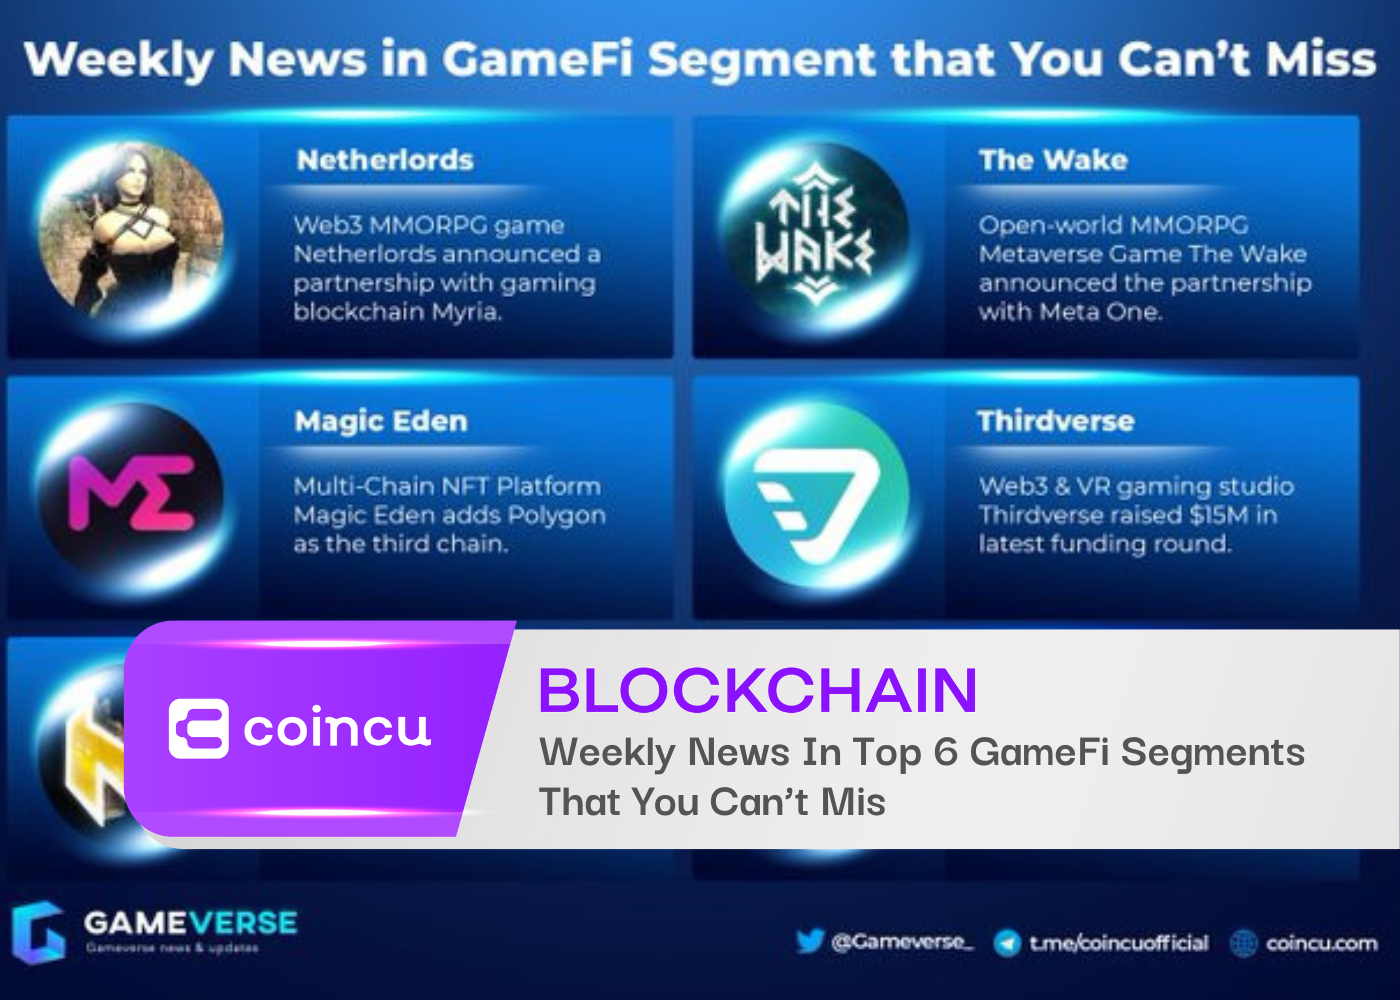 Weekly News In GameFi Segment That You Can’t Miss